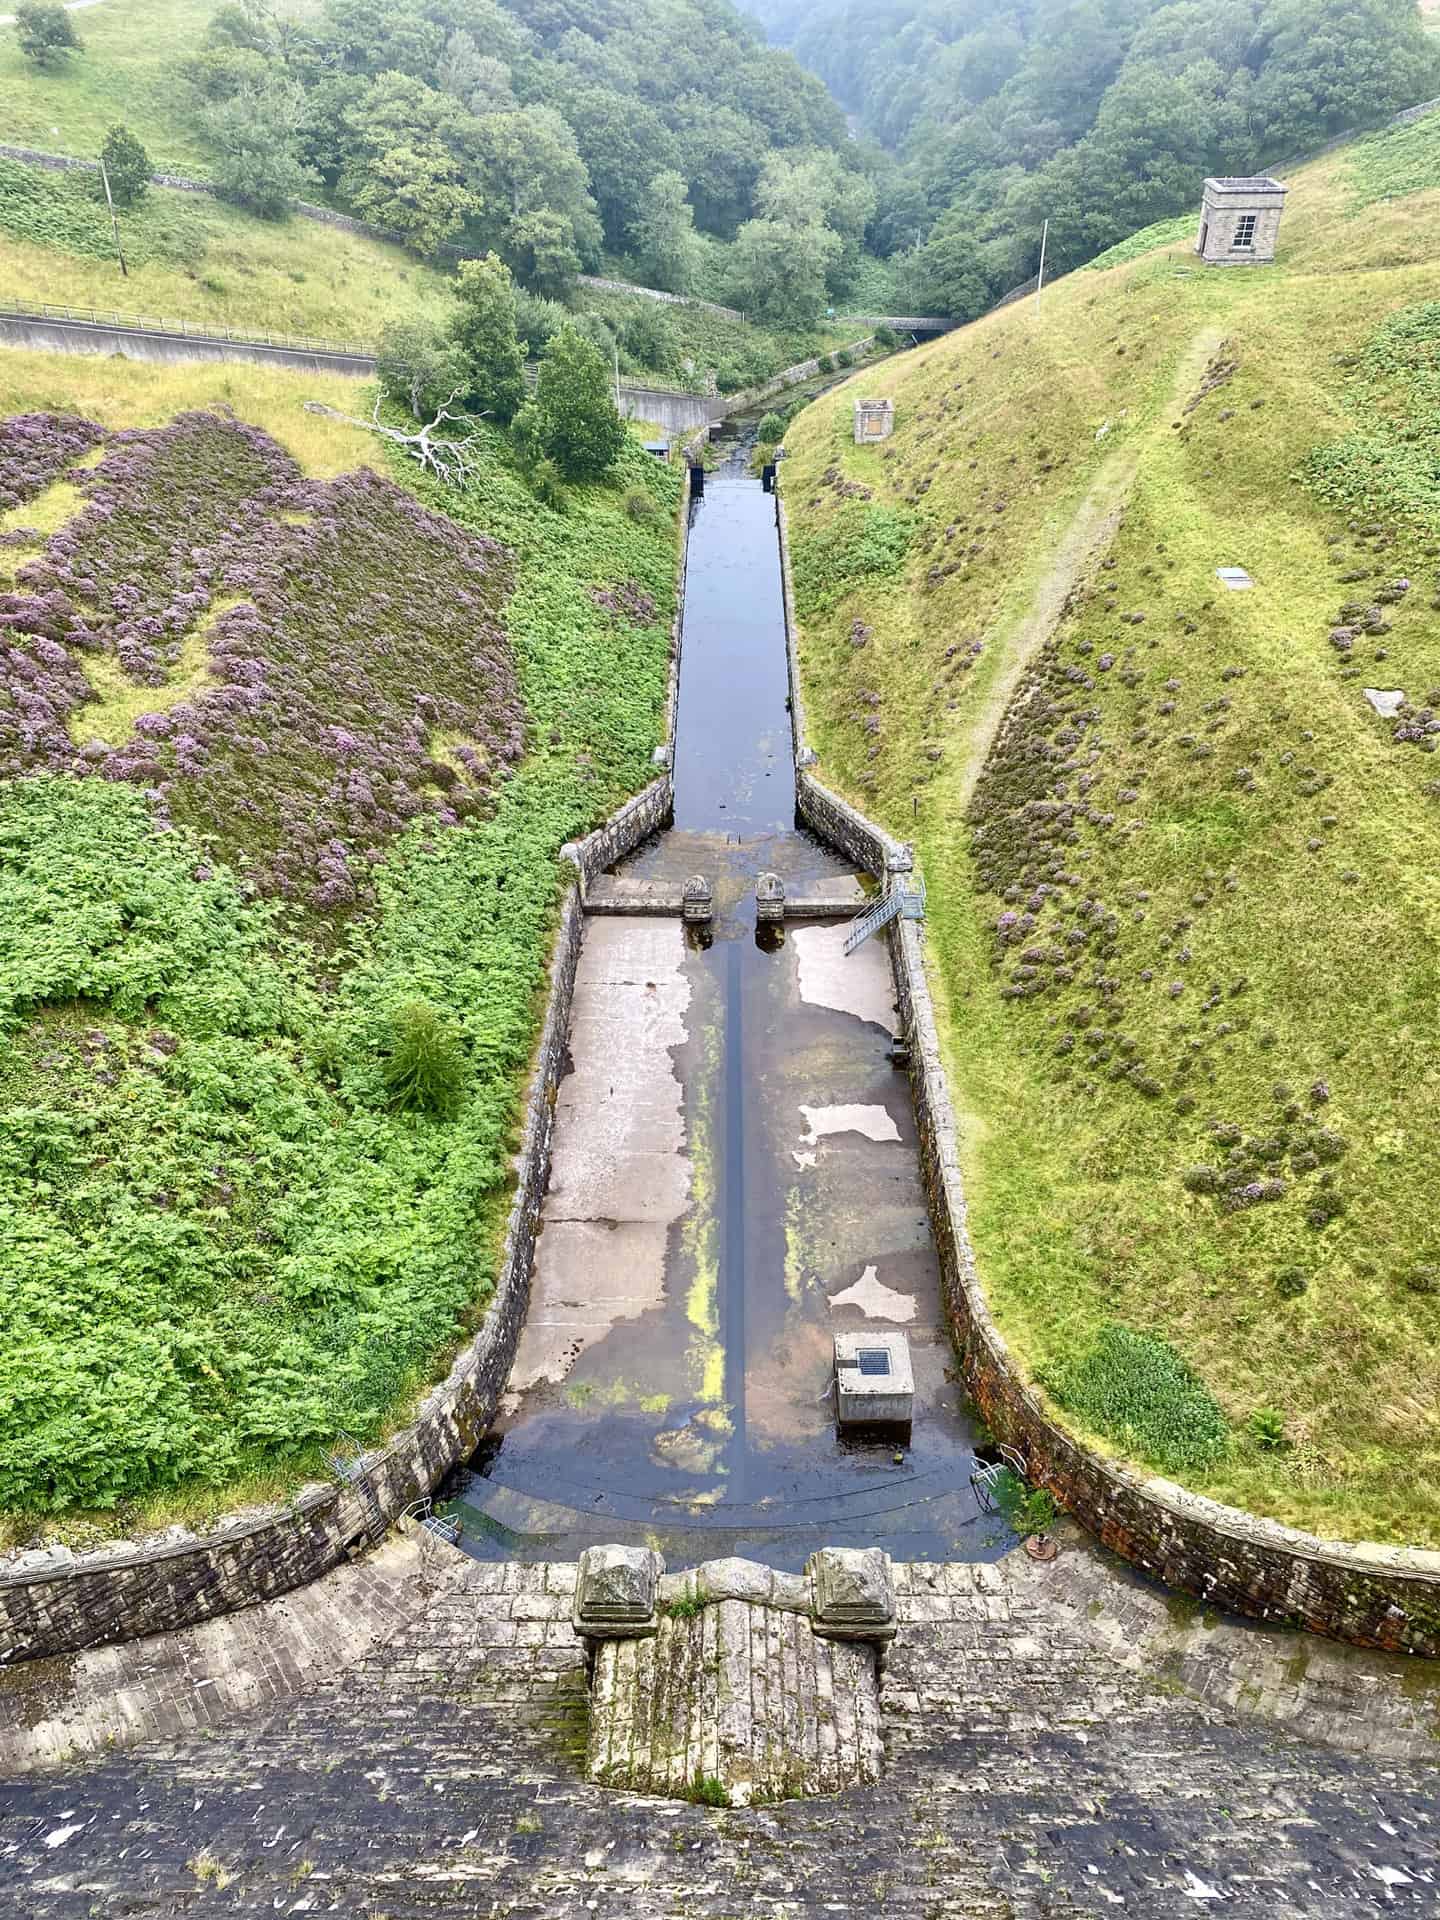 The outlet of Roundhill Reservoir filling into Leighton Reservoir.